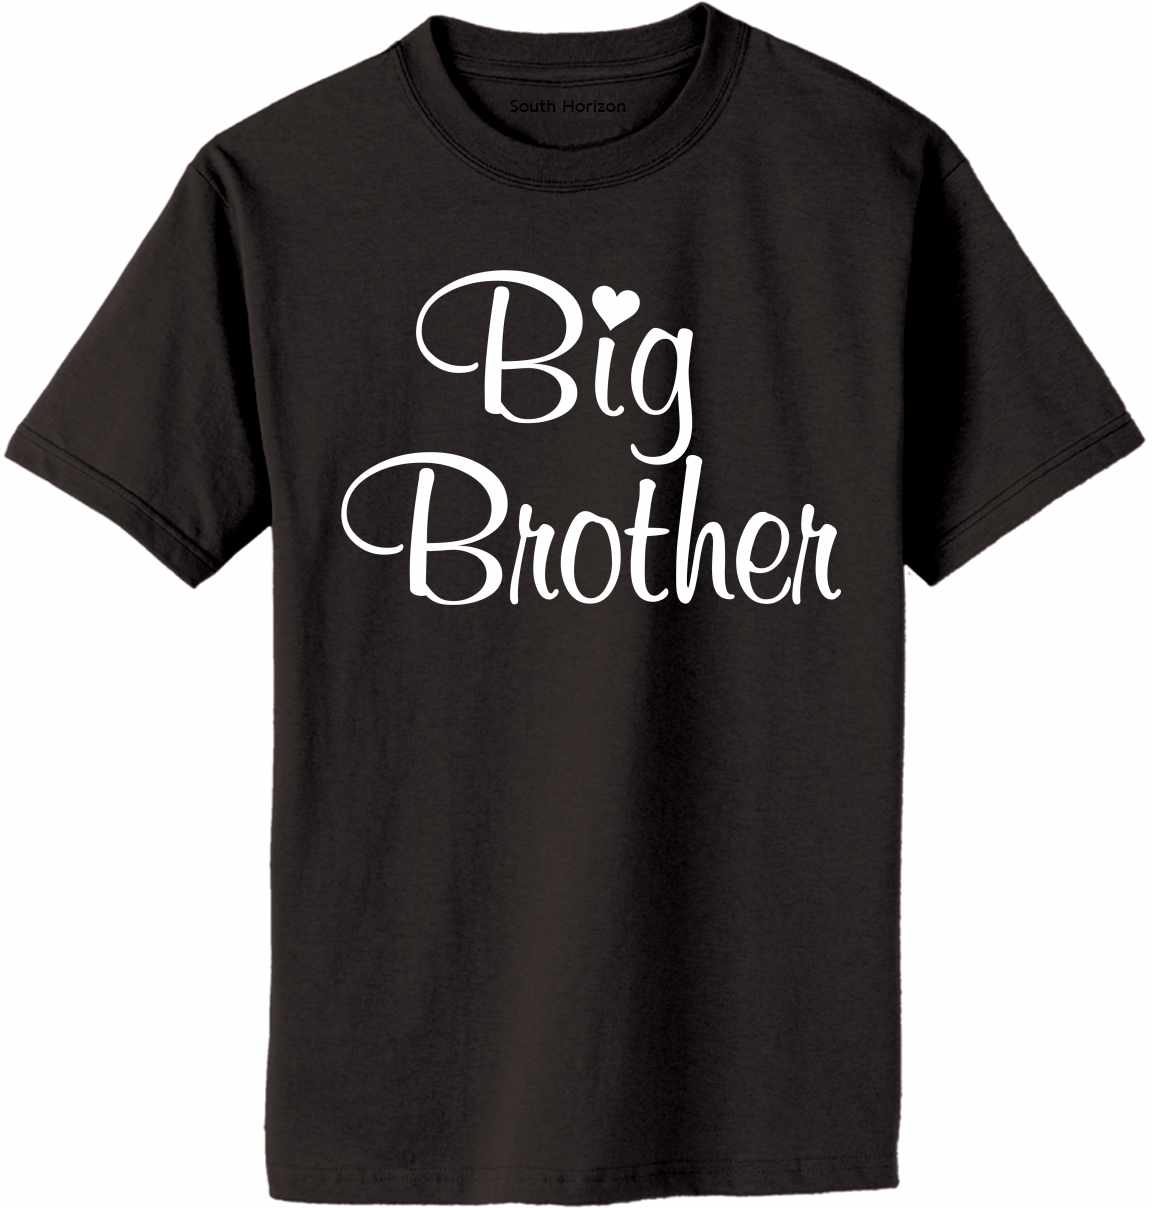 Big Brother on Adult T-Shirt